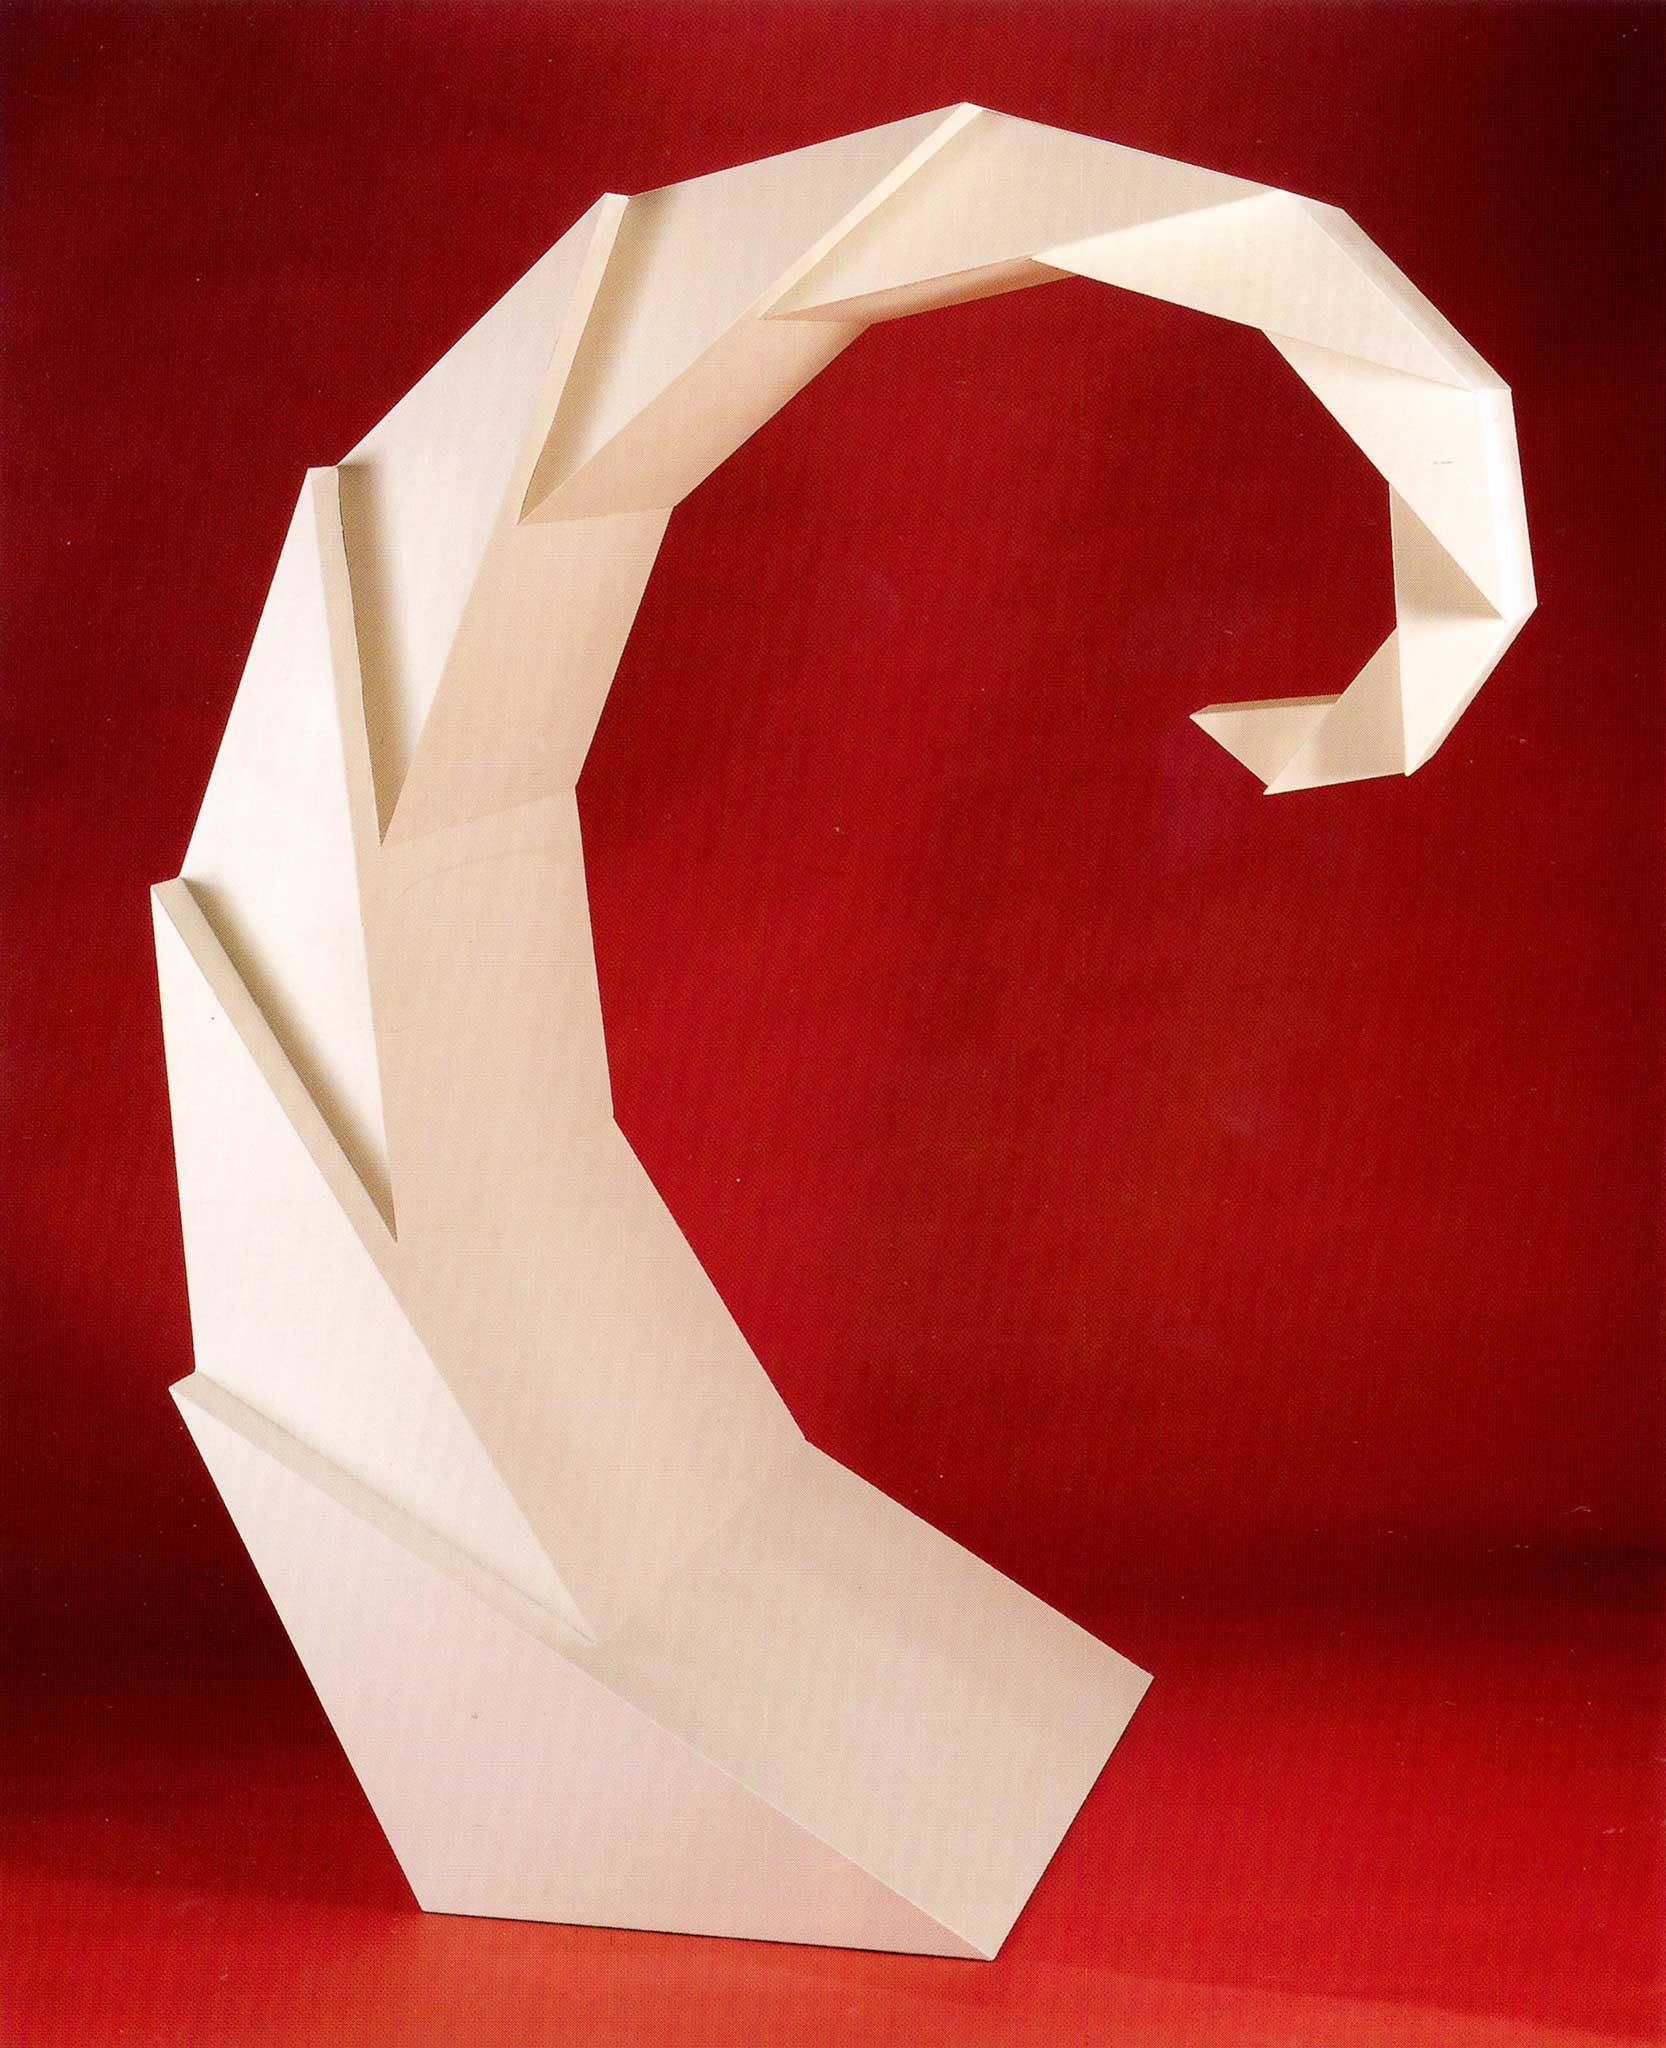 white geometric, faceted spiraling sculpture with a red background